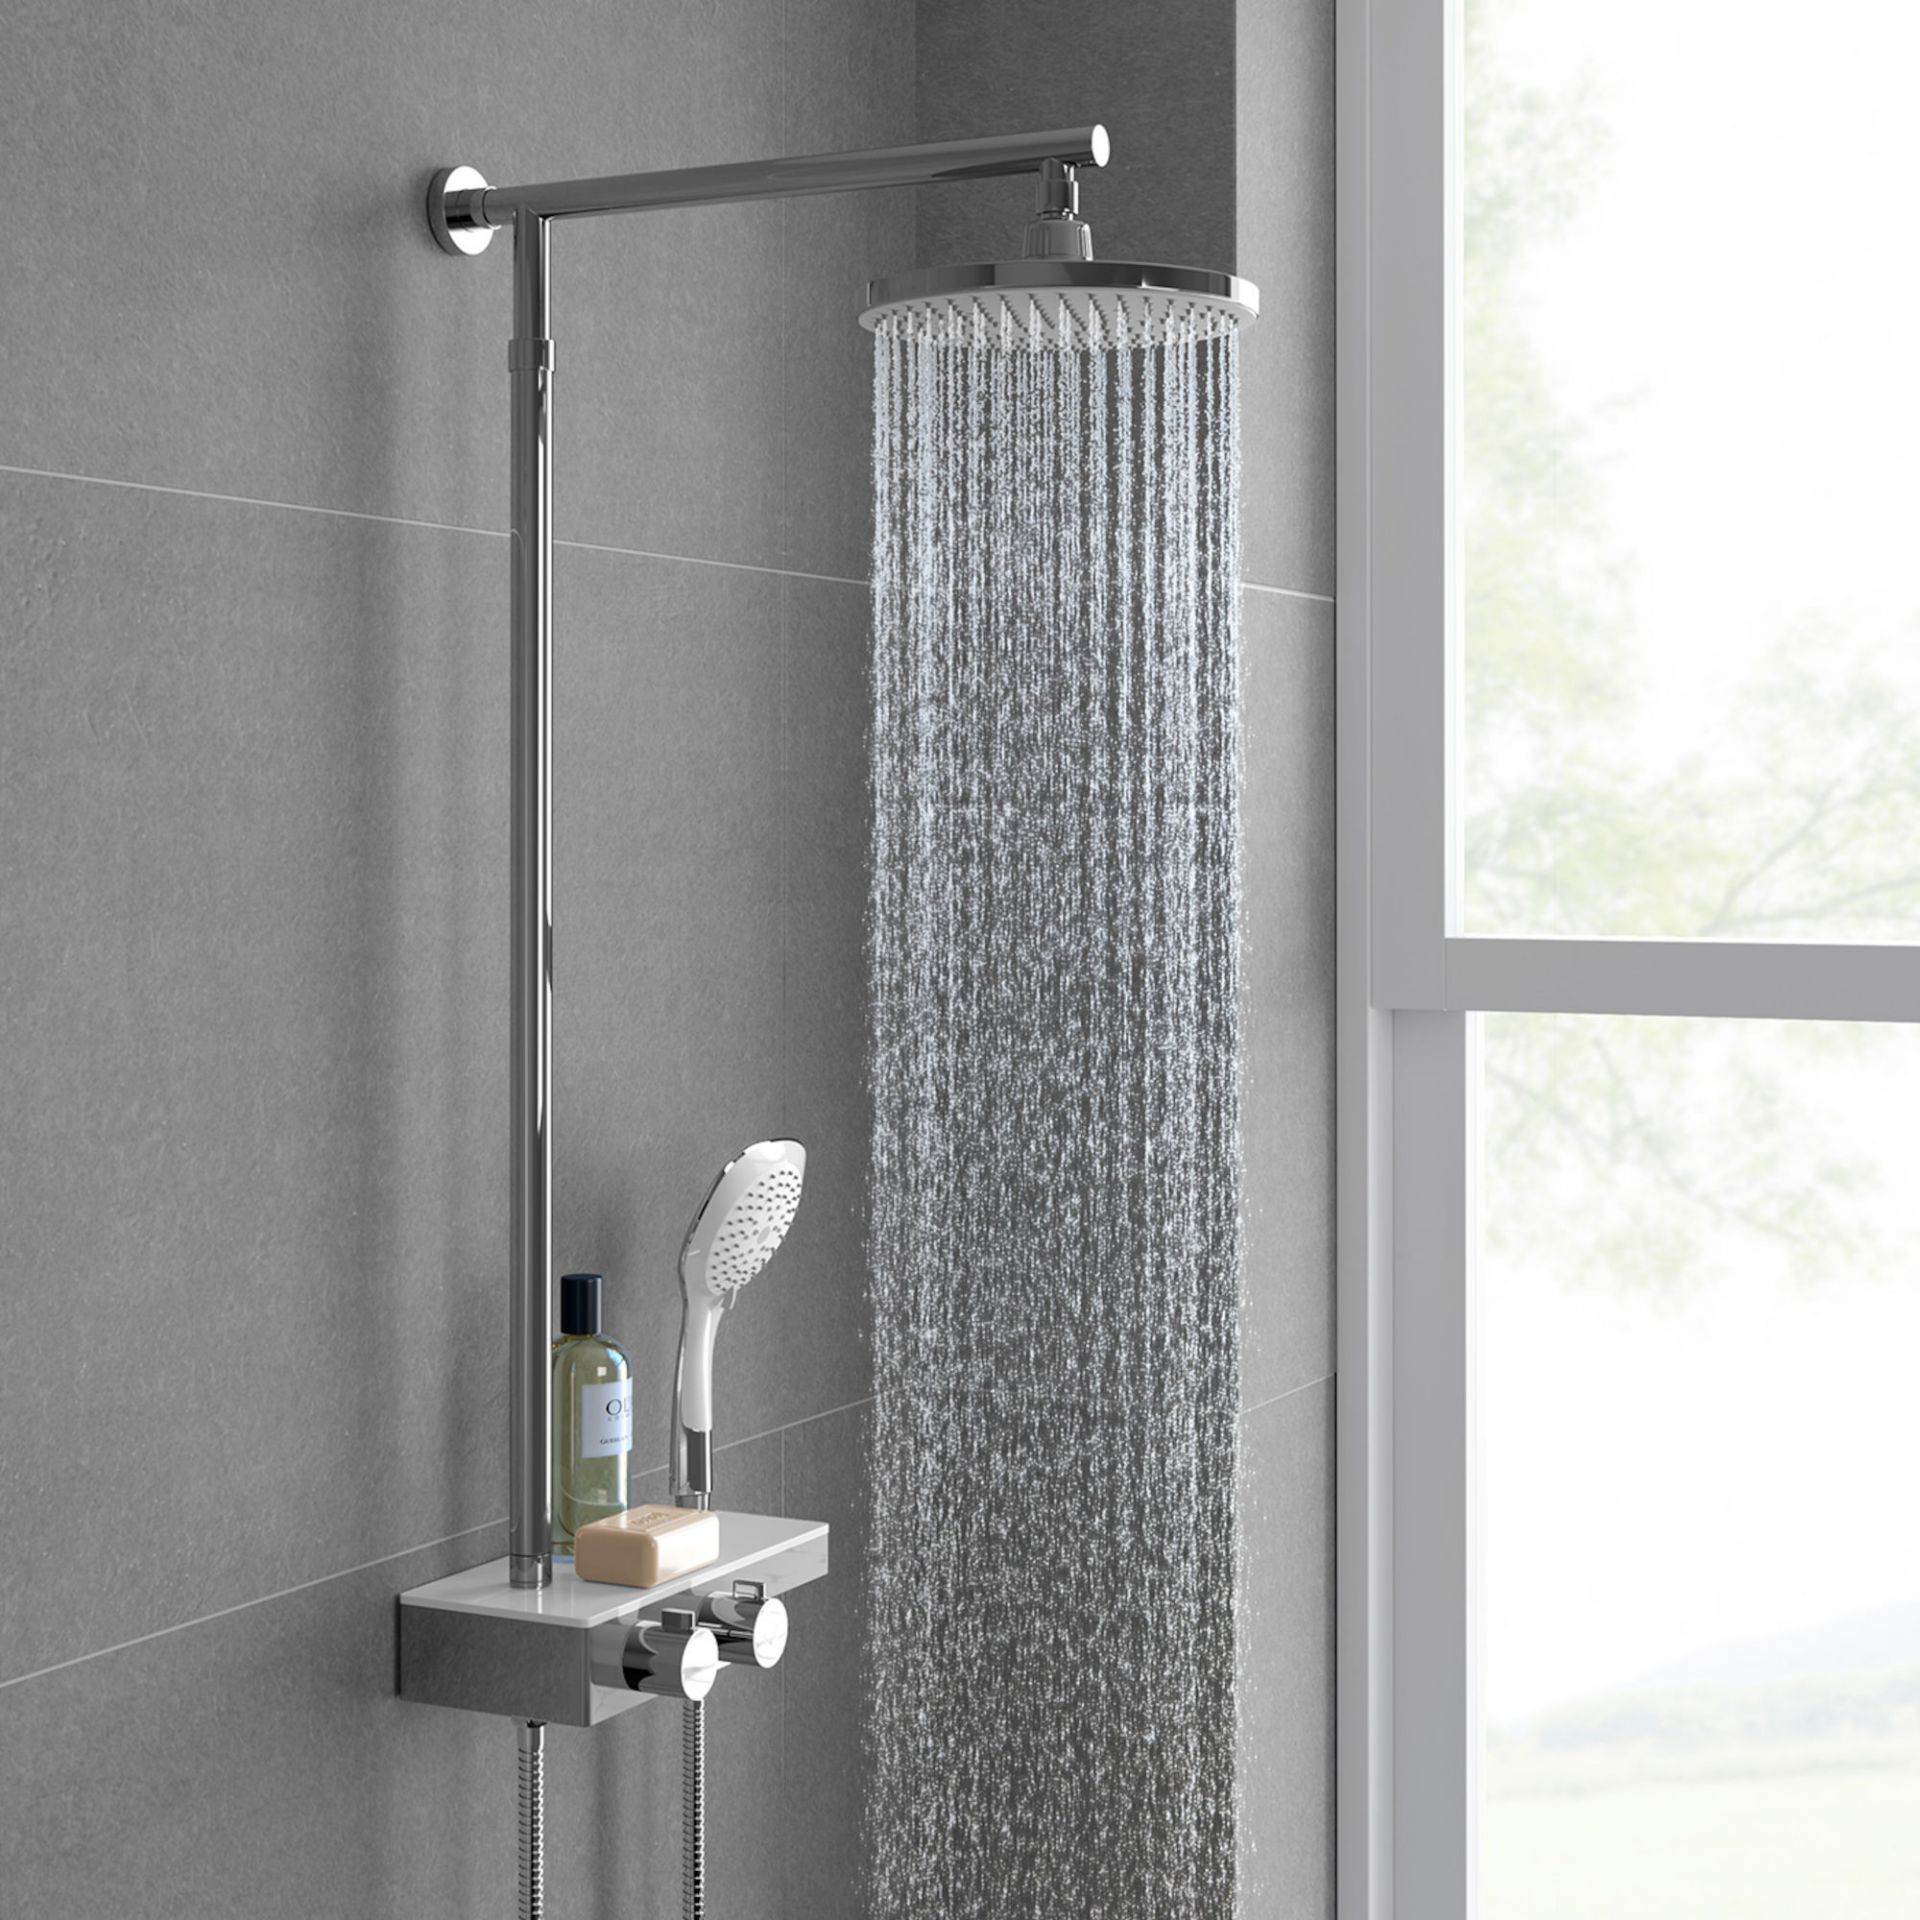 (OS37) Round Exposed Thermostatic Mixer Shower Kit Medium Head & Shelf. RRP £349.99. Cool to touch